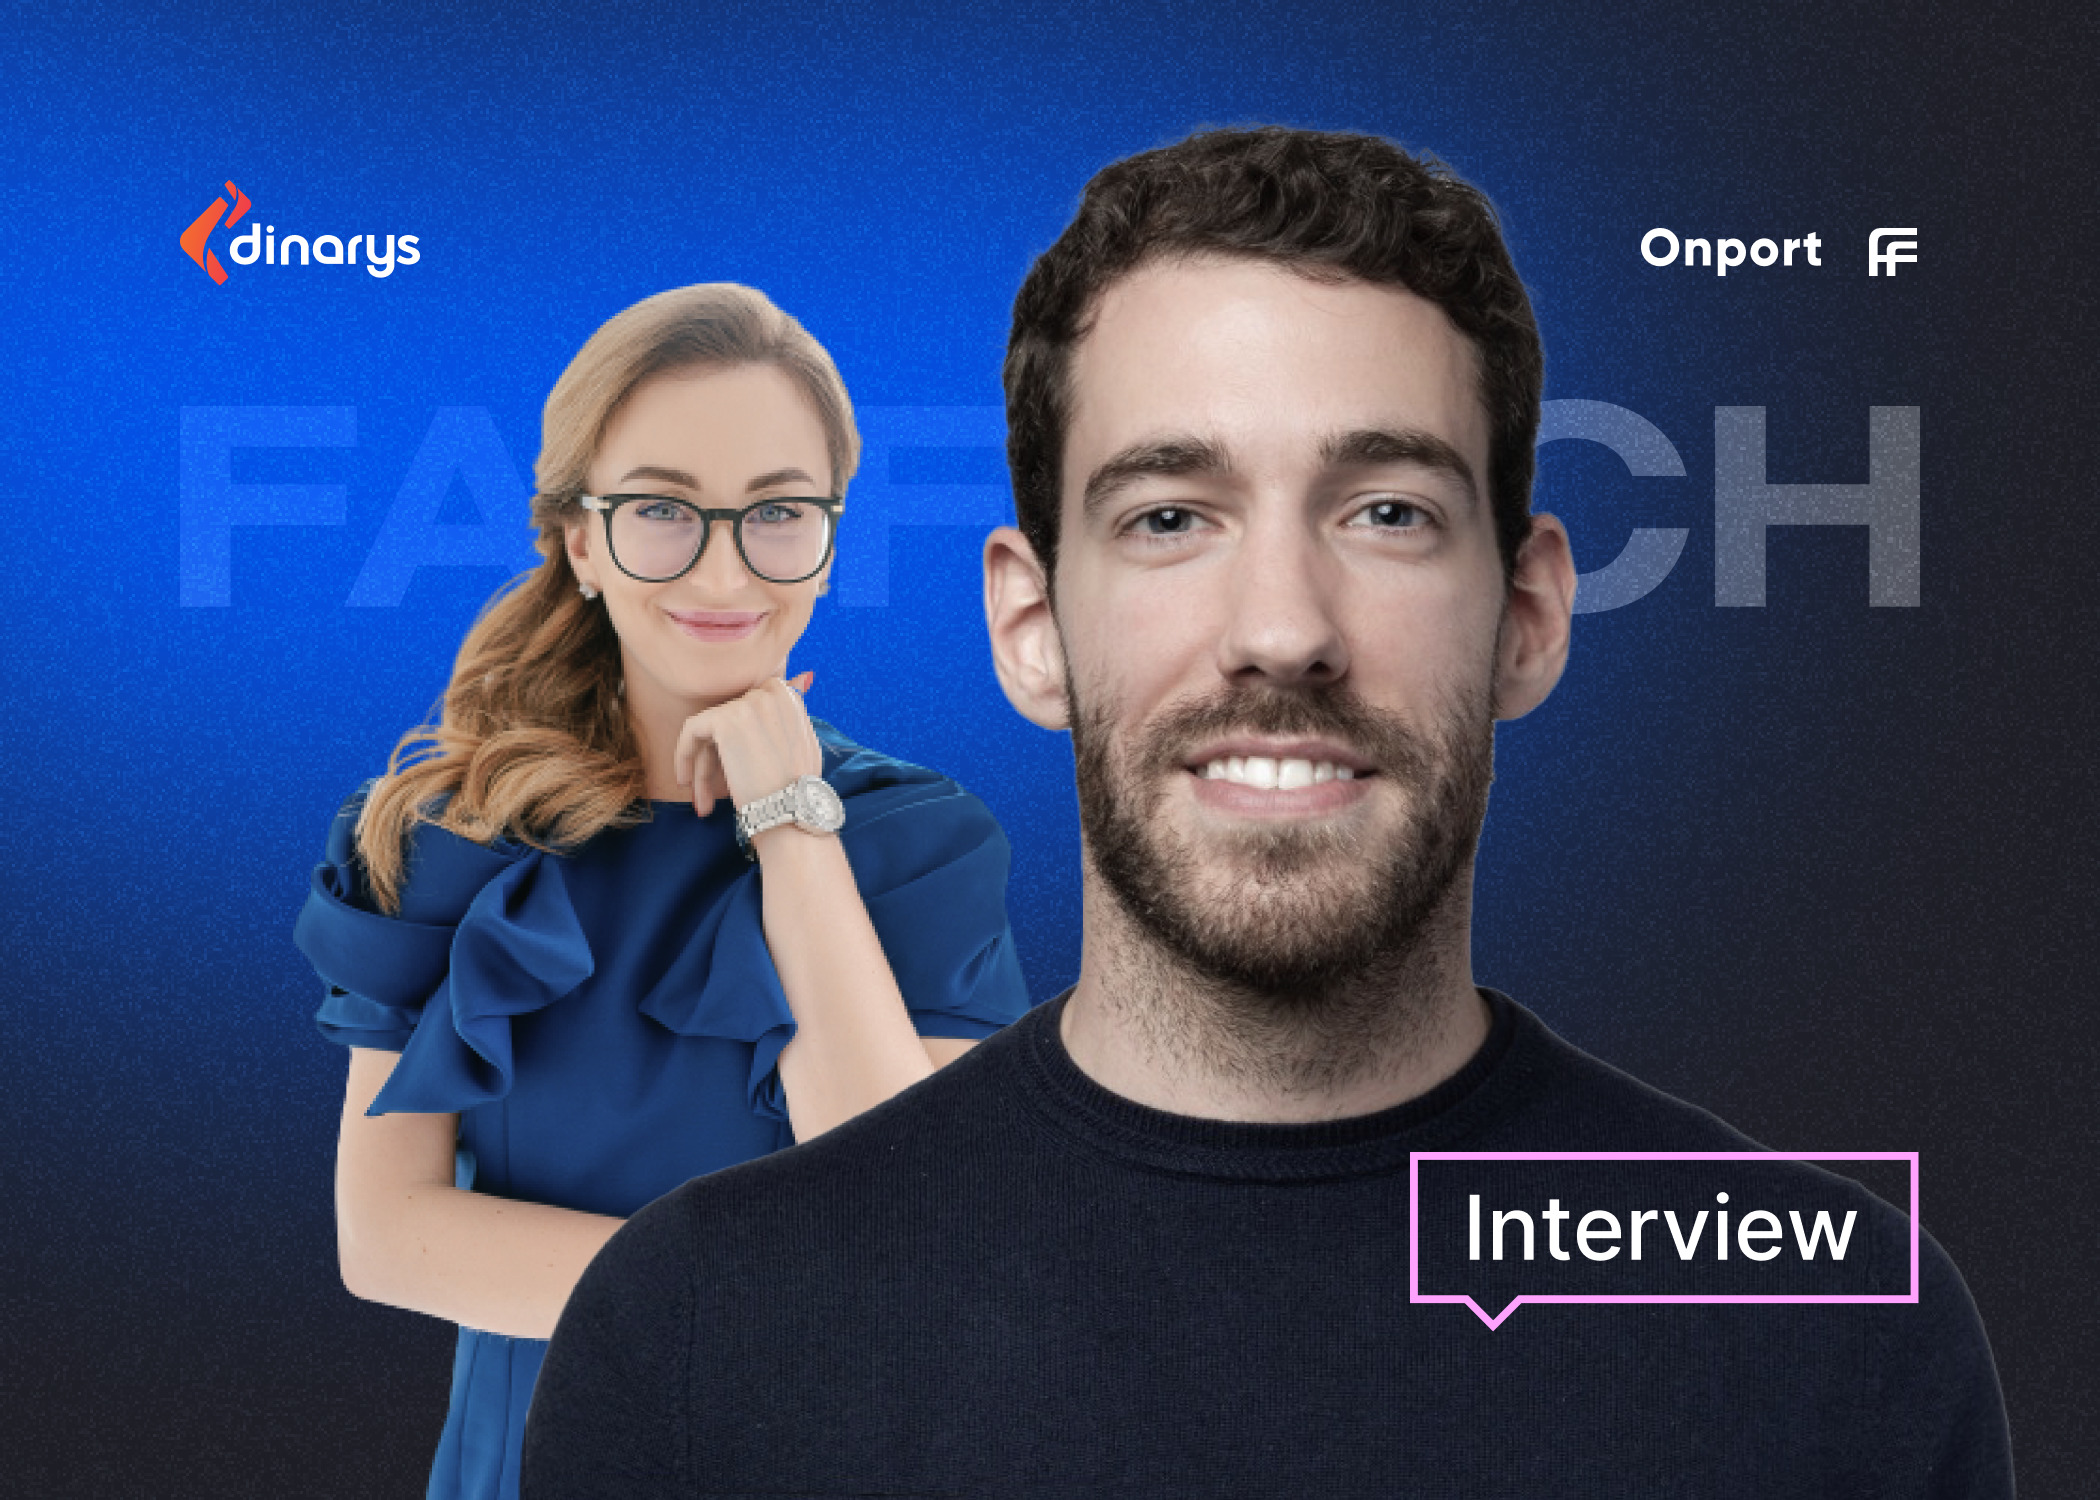 Interview with Onport About Farfetch Acquisition, Future Plans, and Upcoming E-commerce Challenges